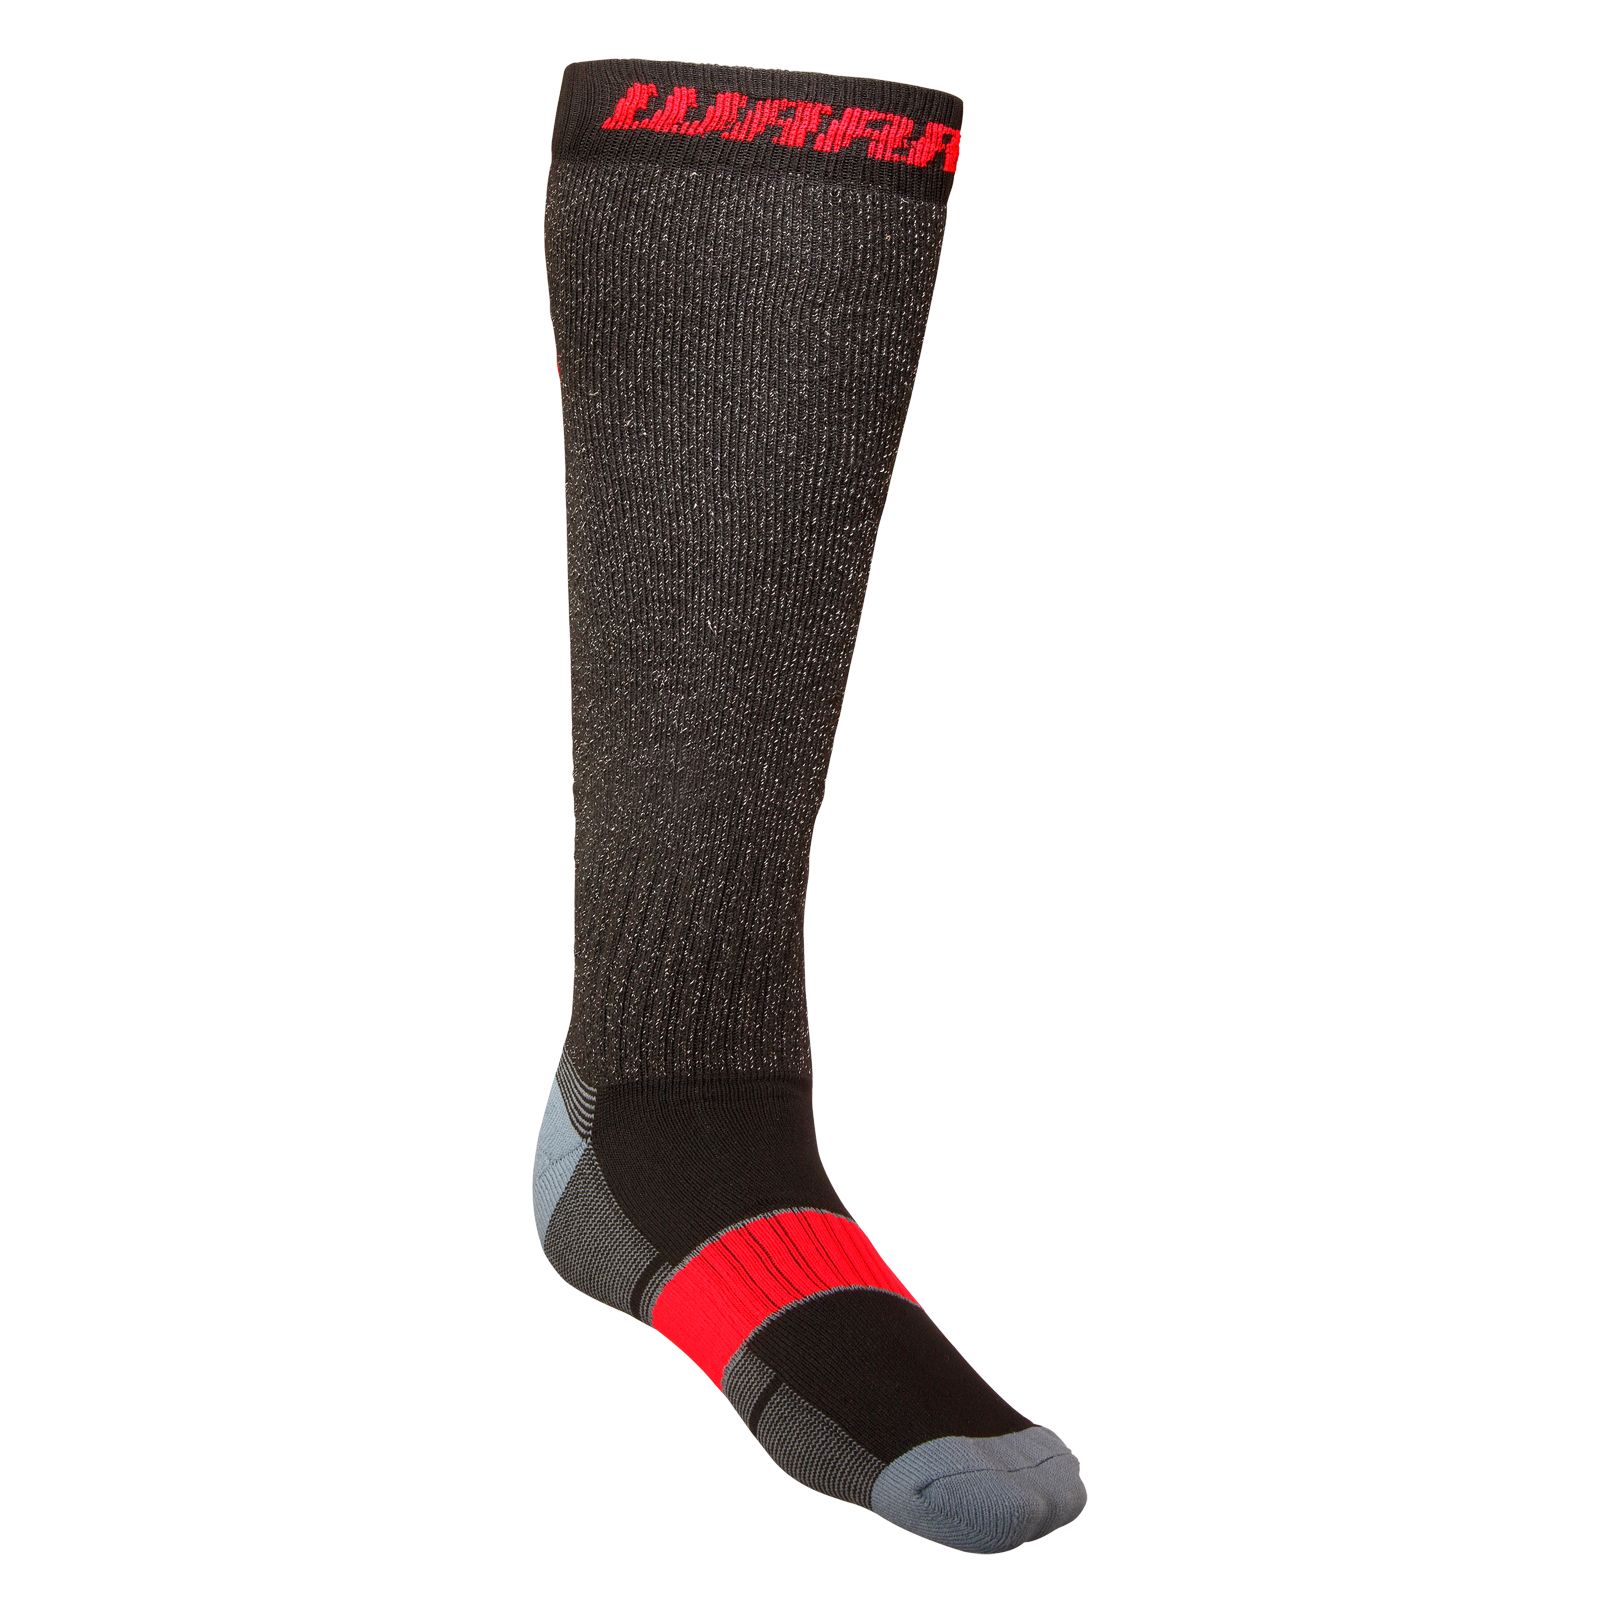 Cut Proof Sock, Black with Red image number 0